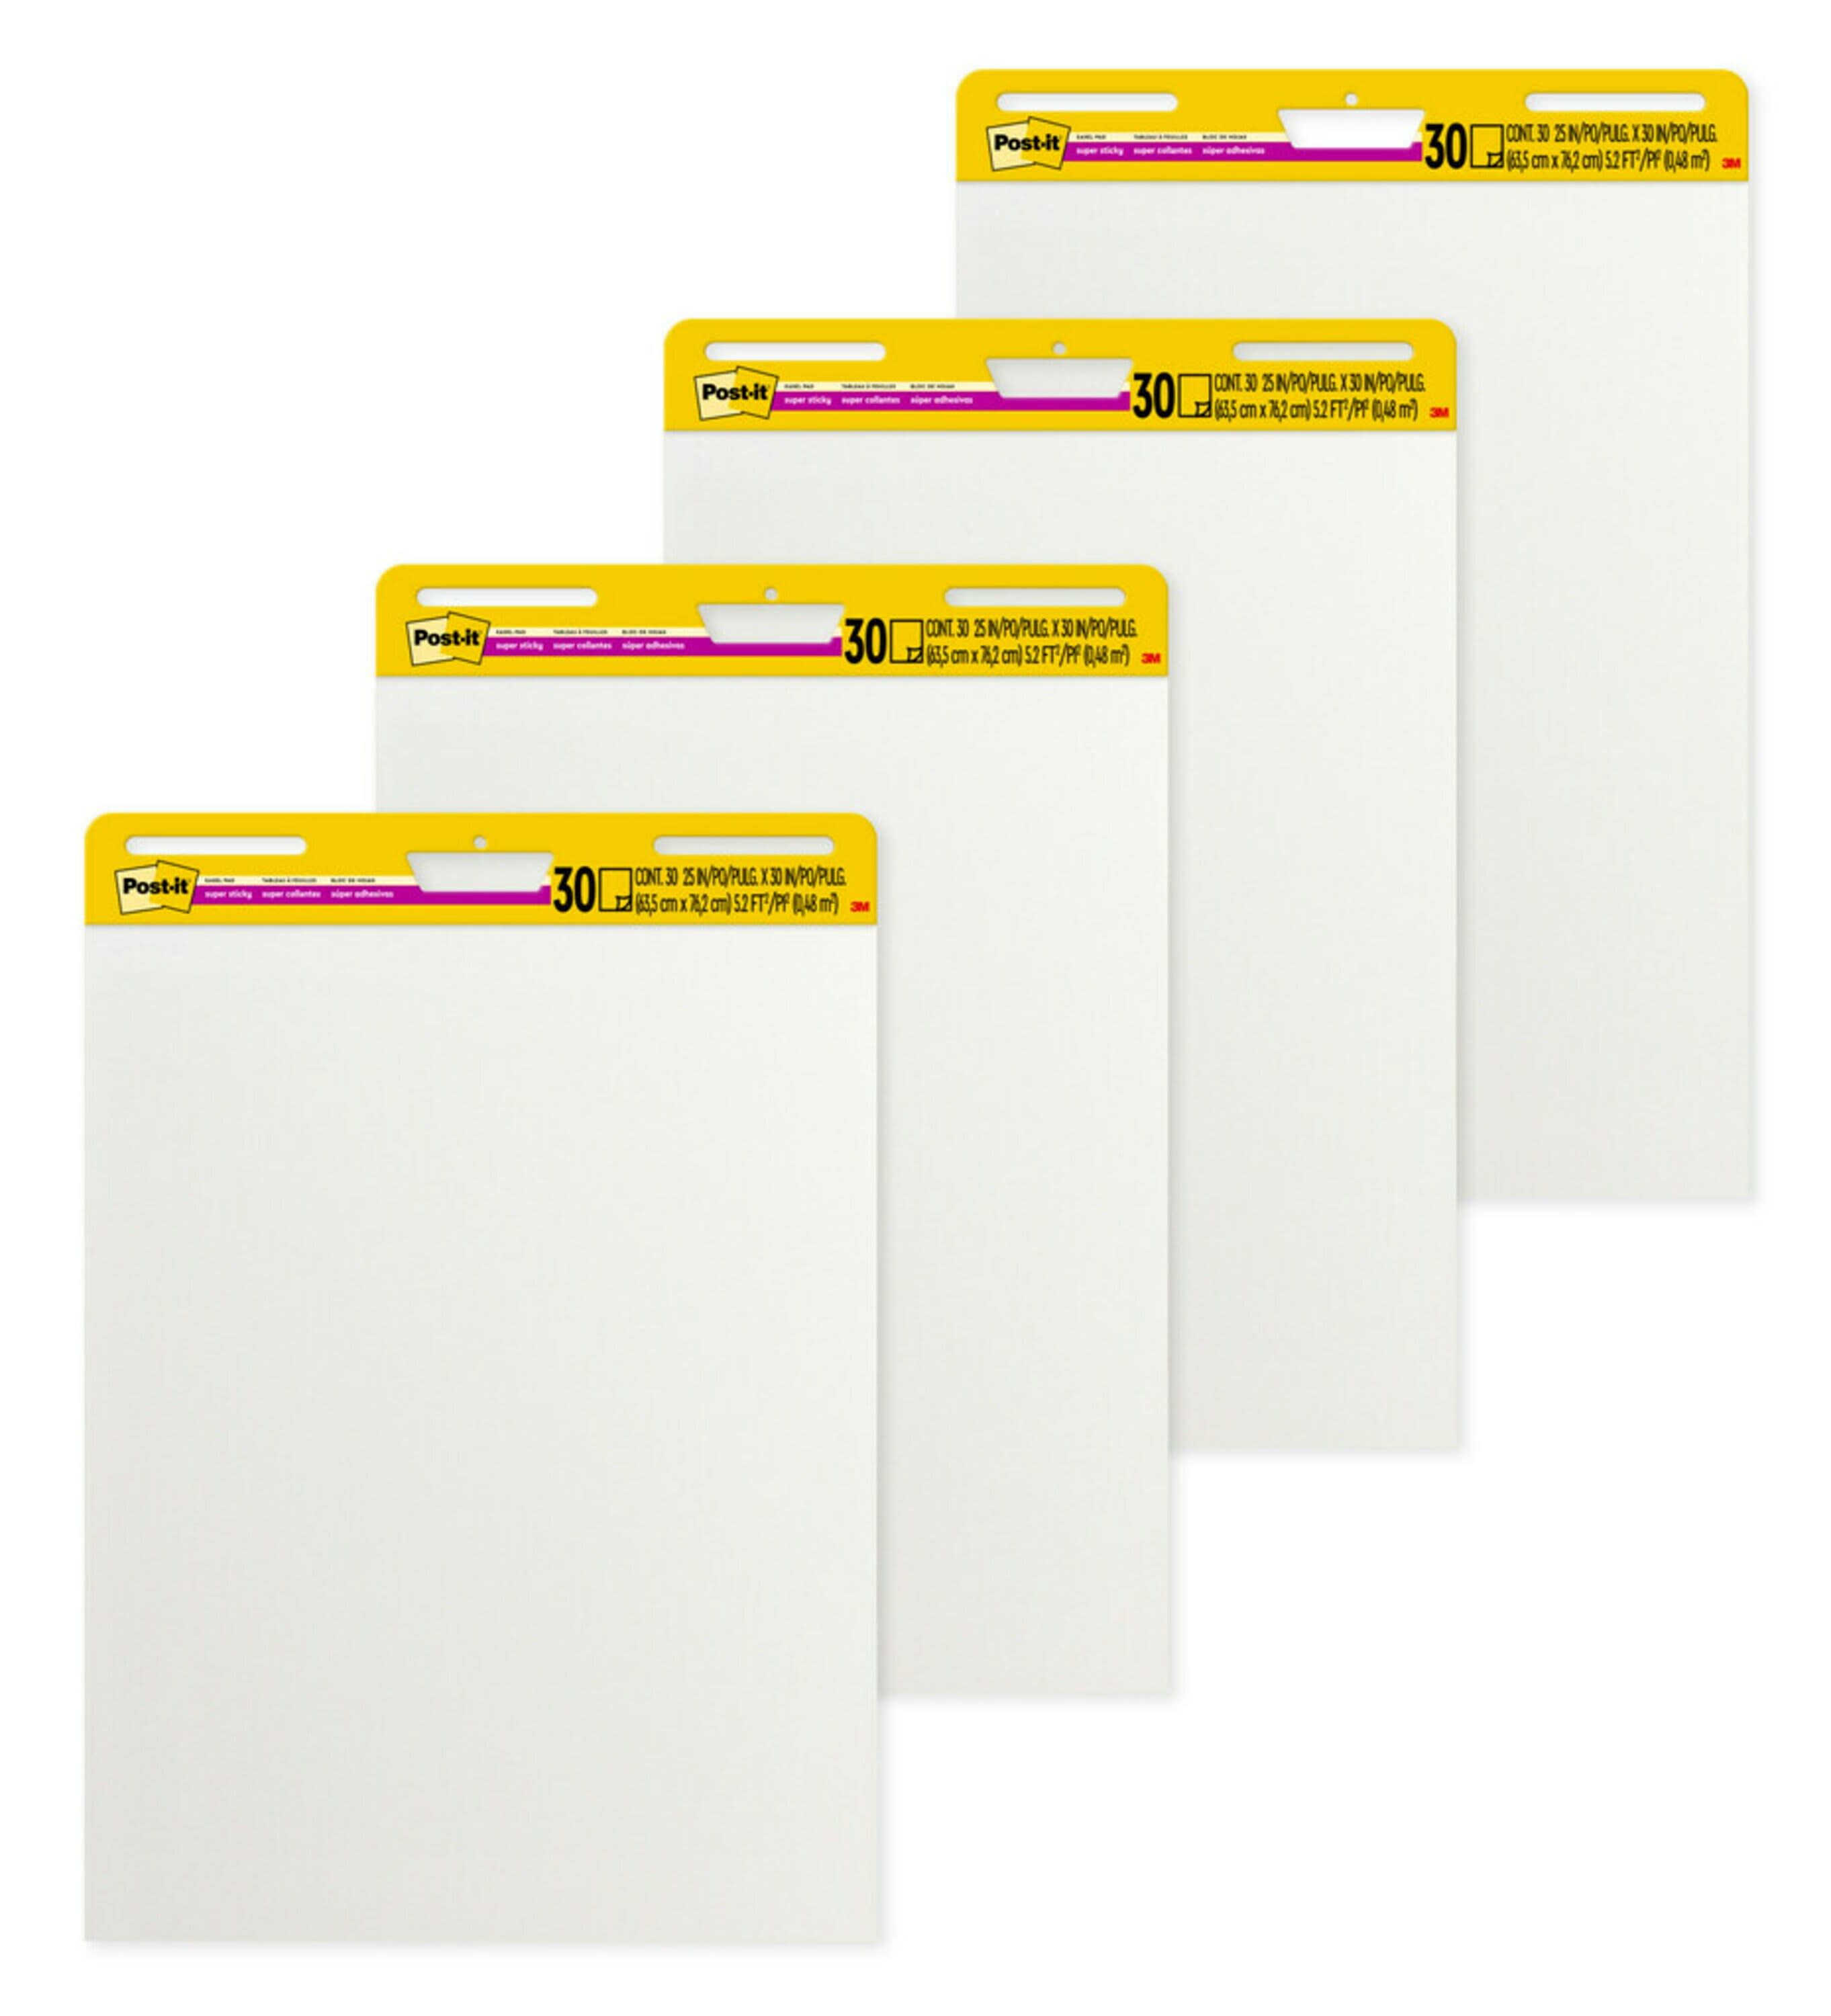 Post-it Easel Pads Super Sticky Pad,Post-It,Easel,Lned,Yw 561, 1 - Kroger